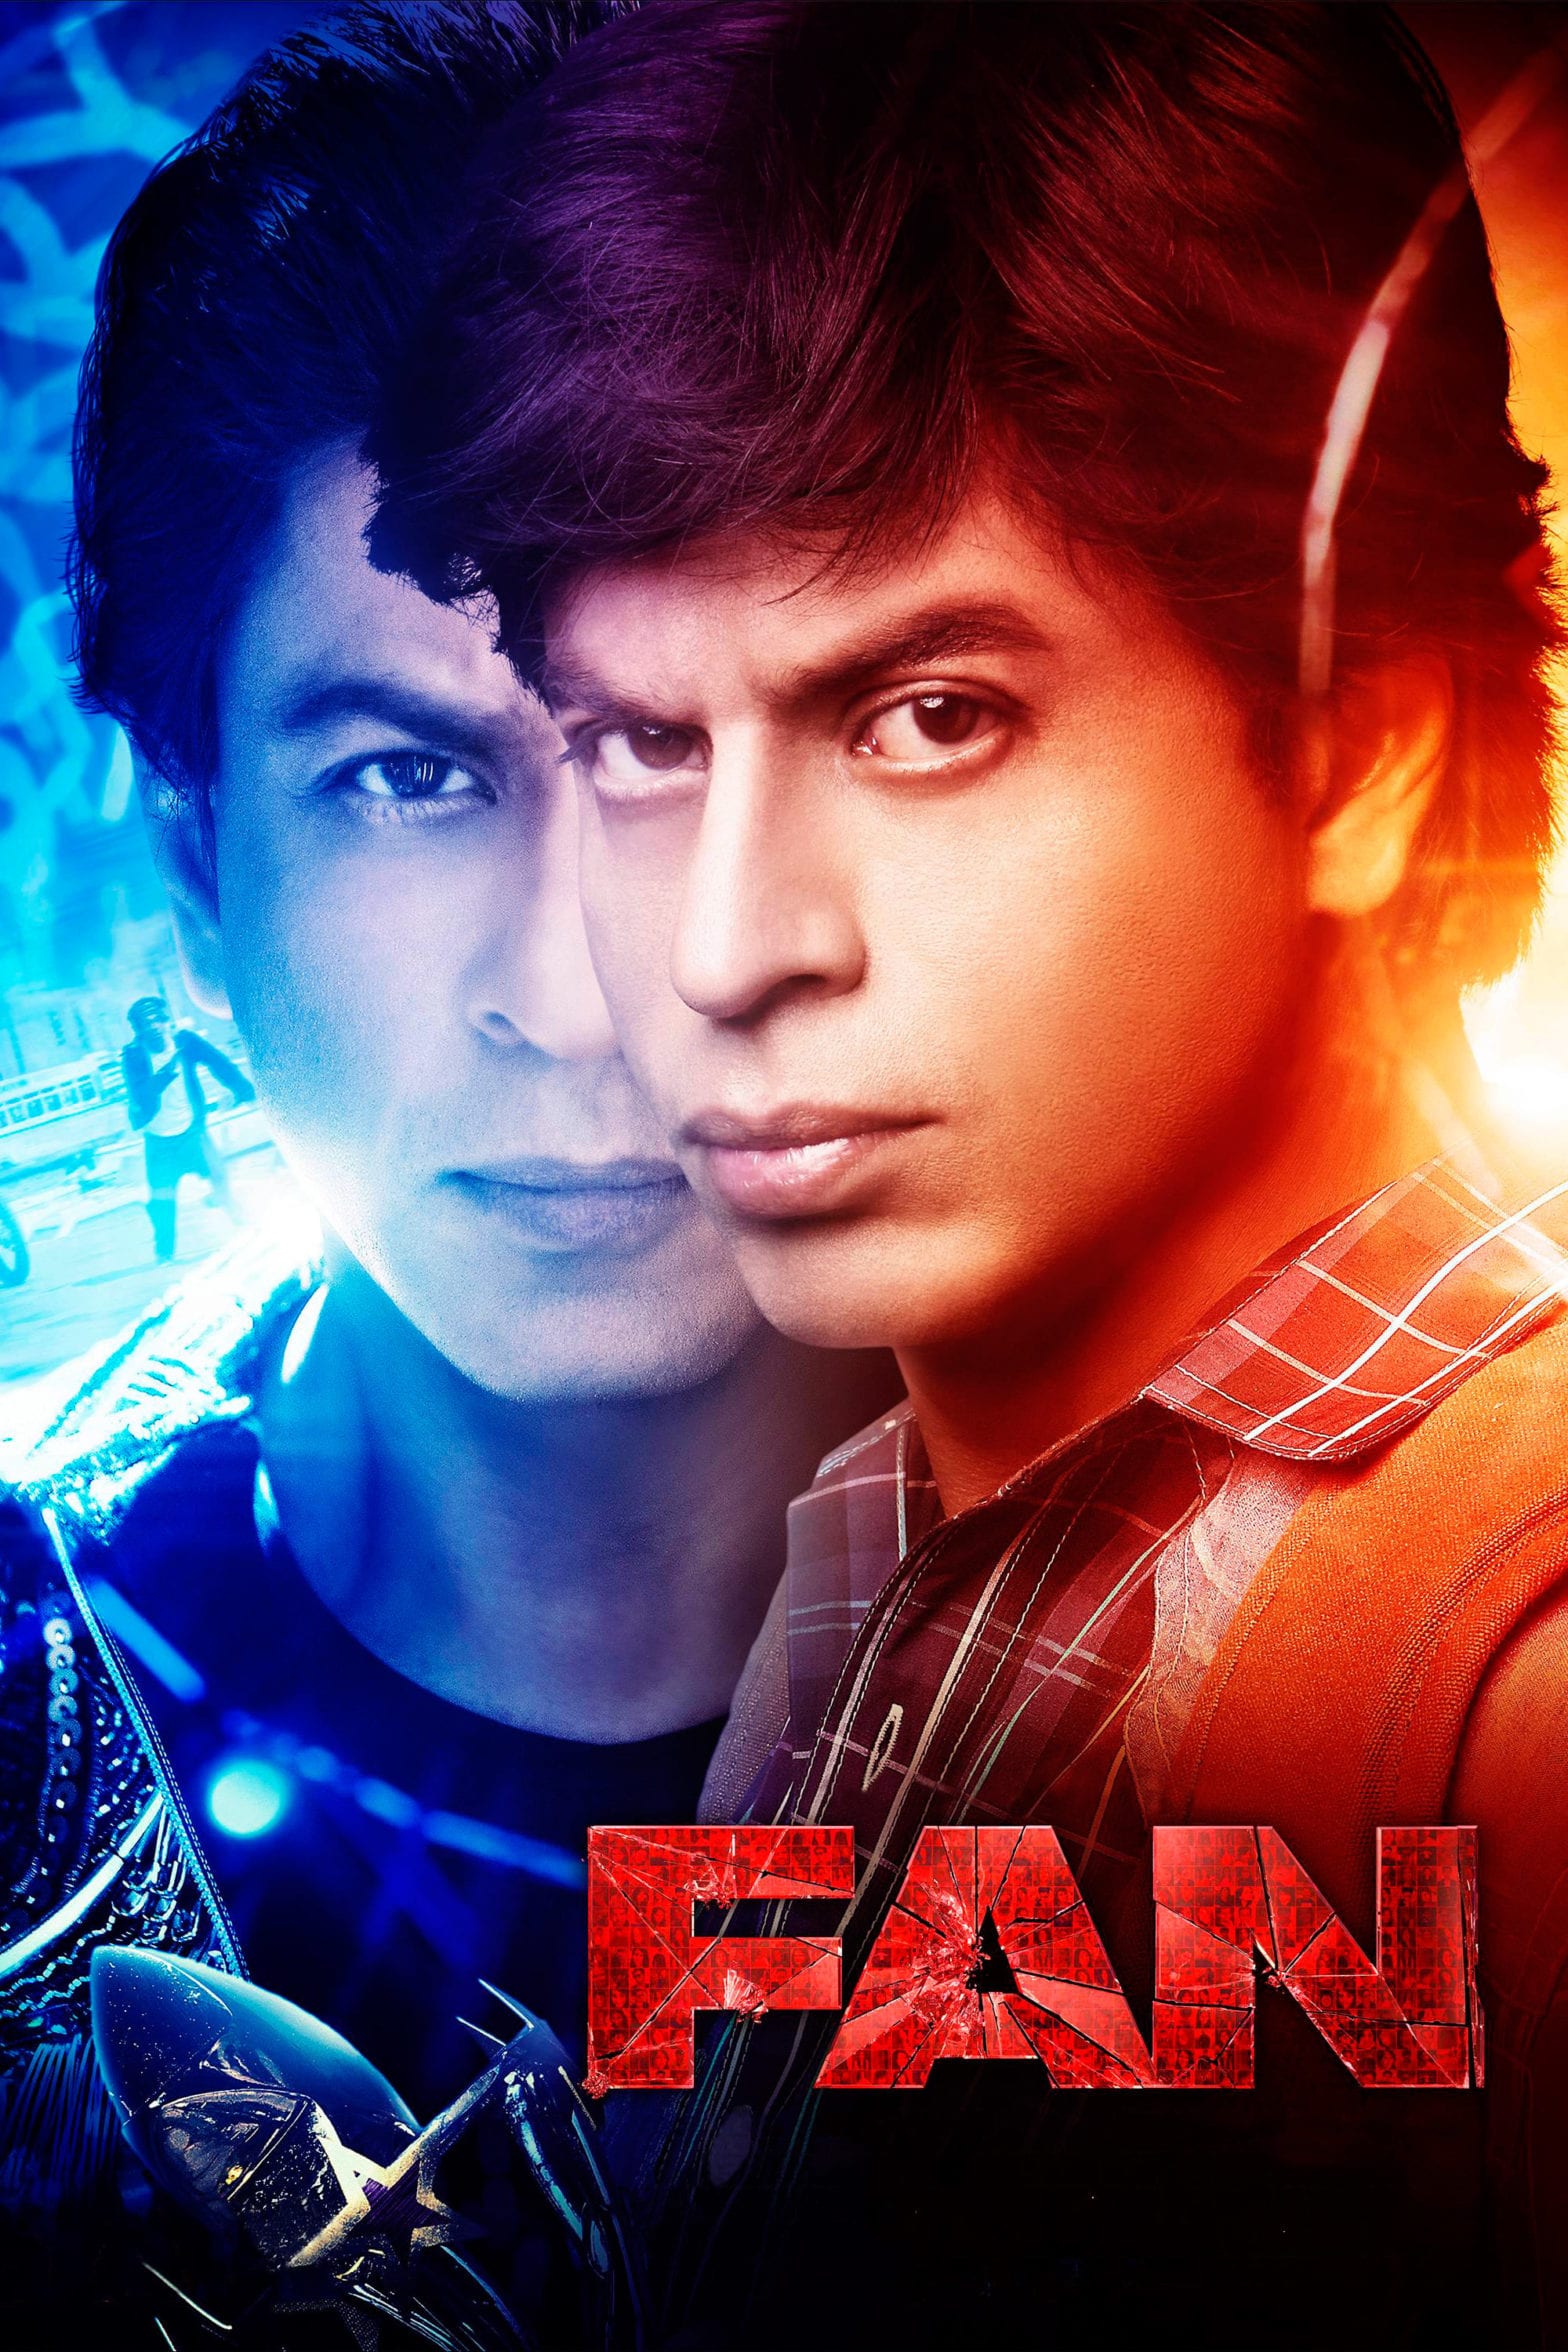 Poster for the movie "Fan"